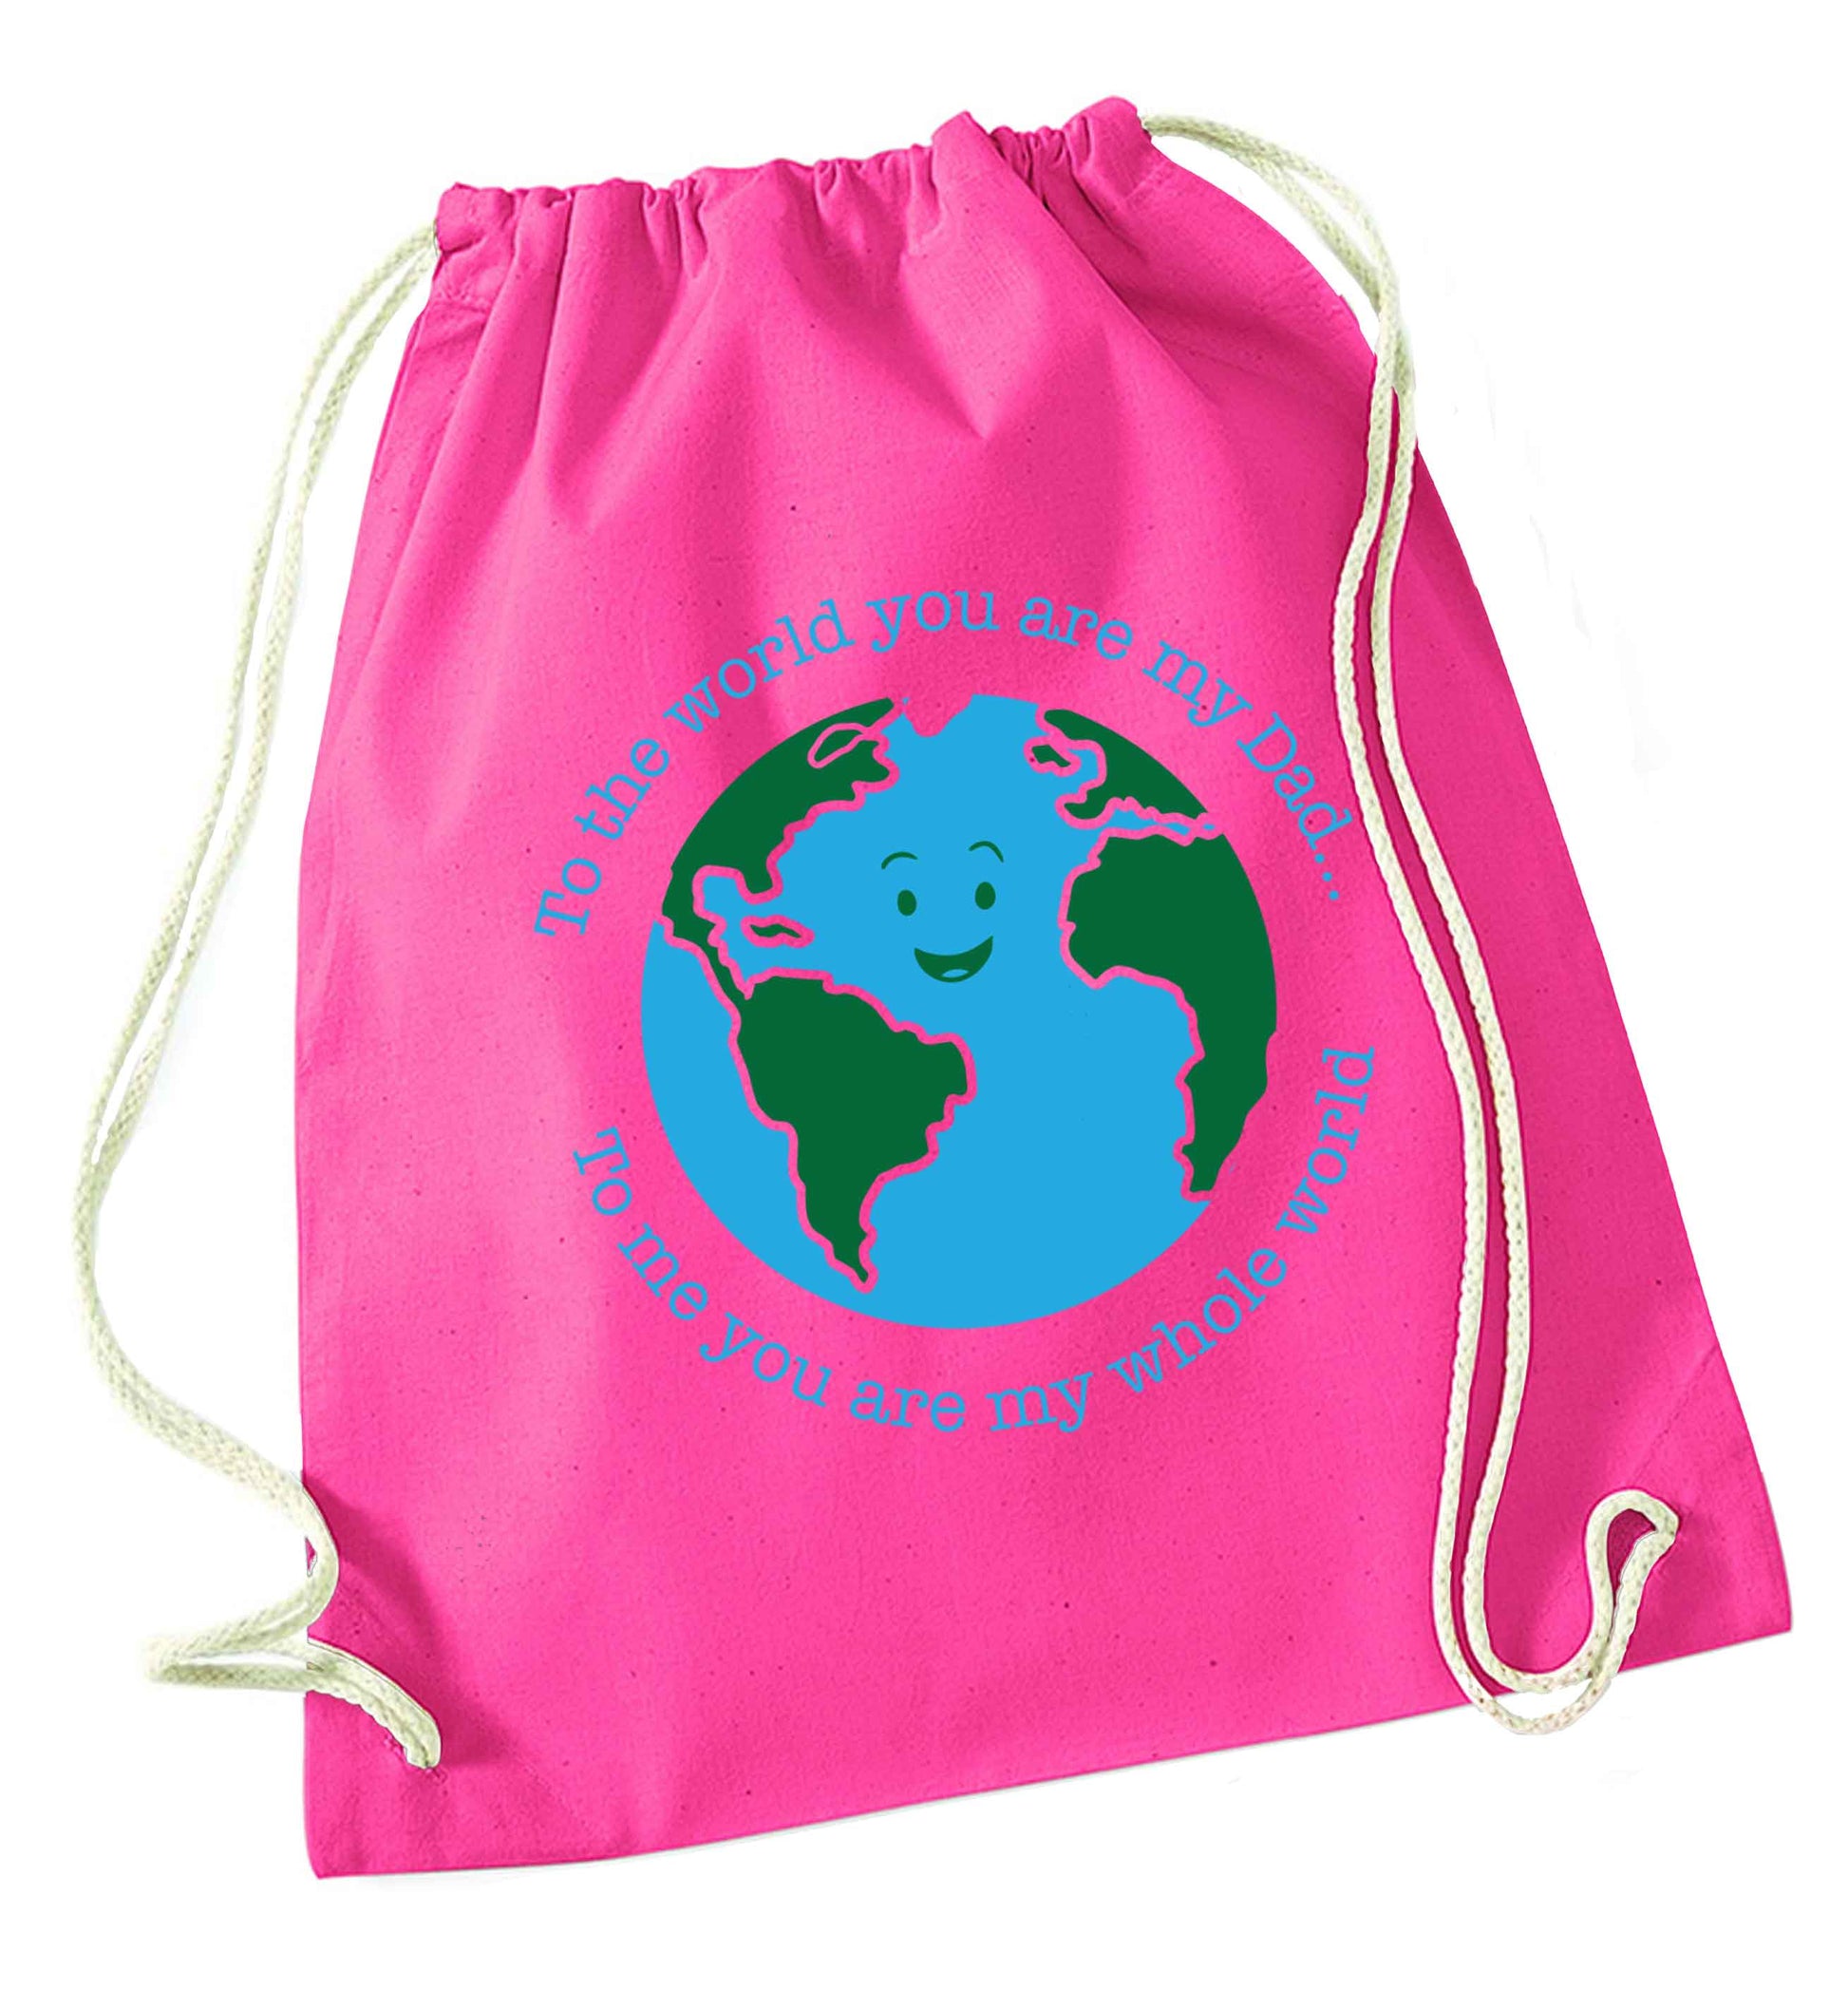 To the world you are my dad, to me you are my whole world pink drawstring bag